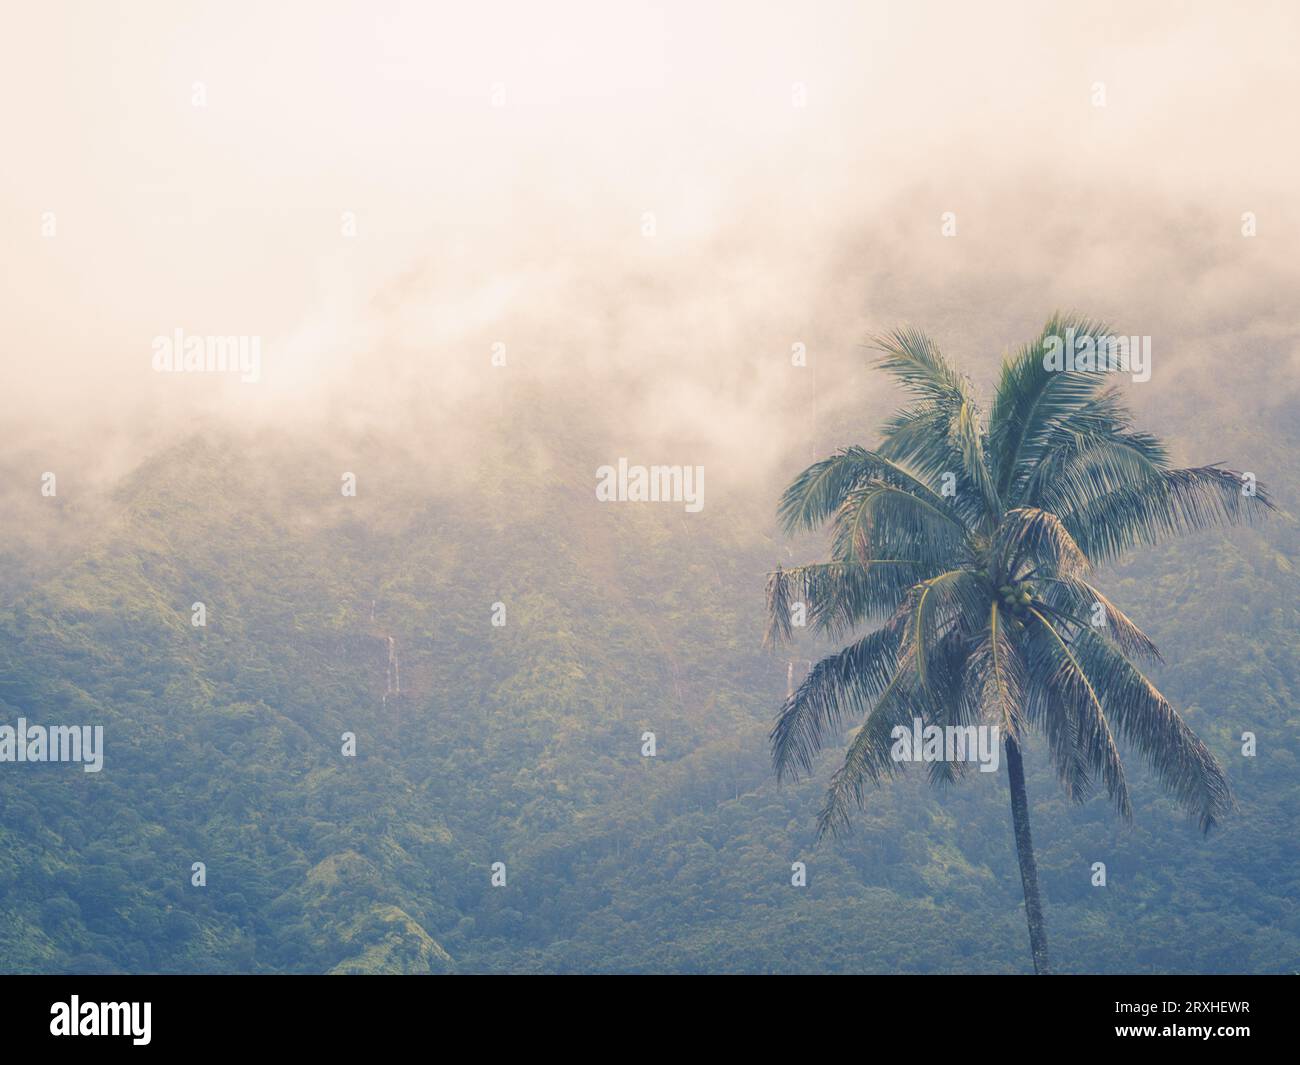 Palm tree against green mountain with mist. Stock Photo